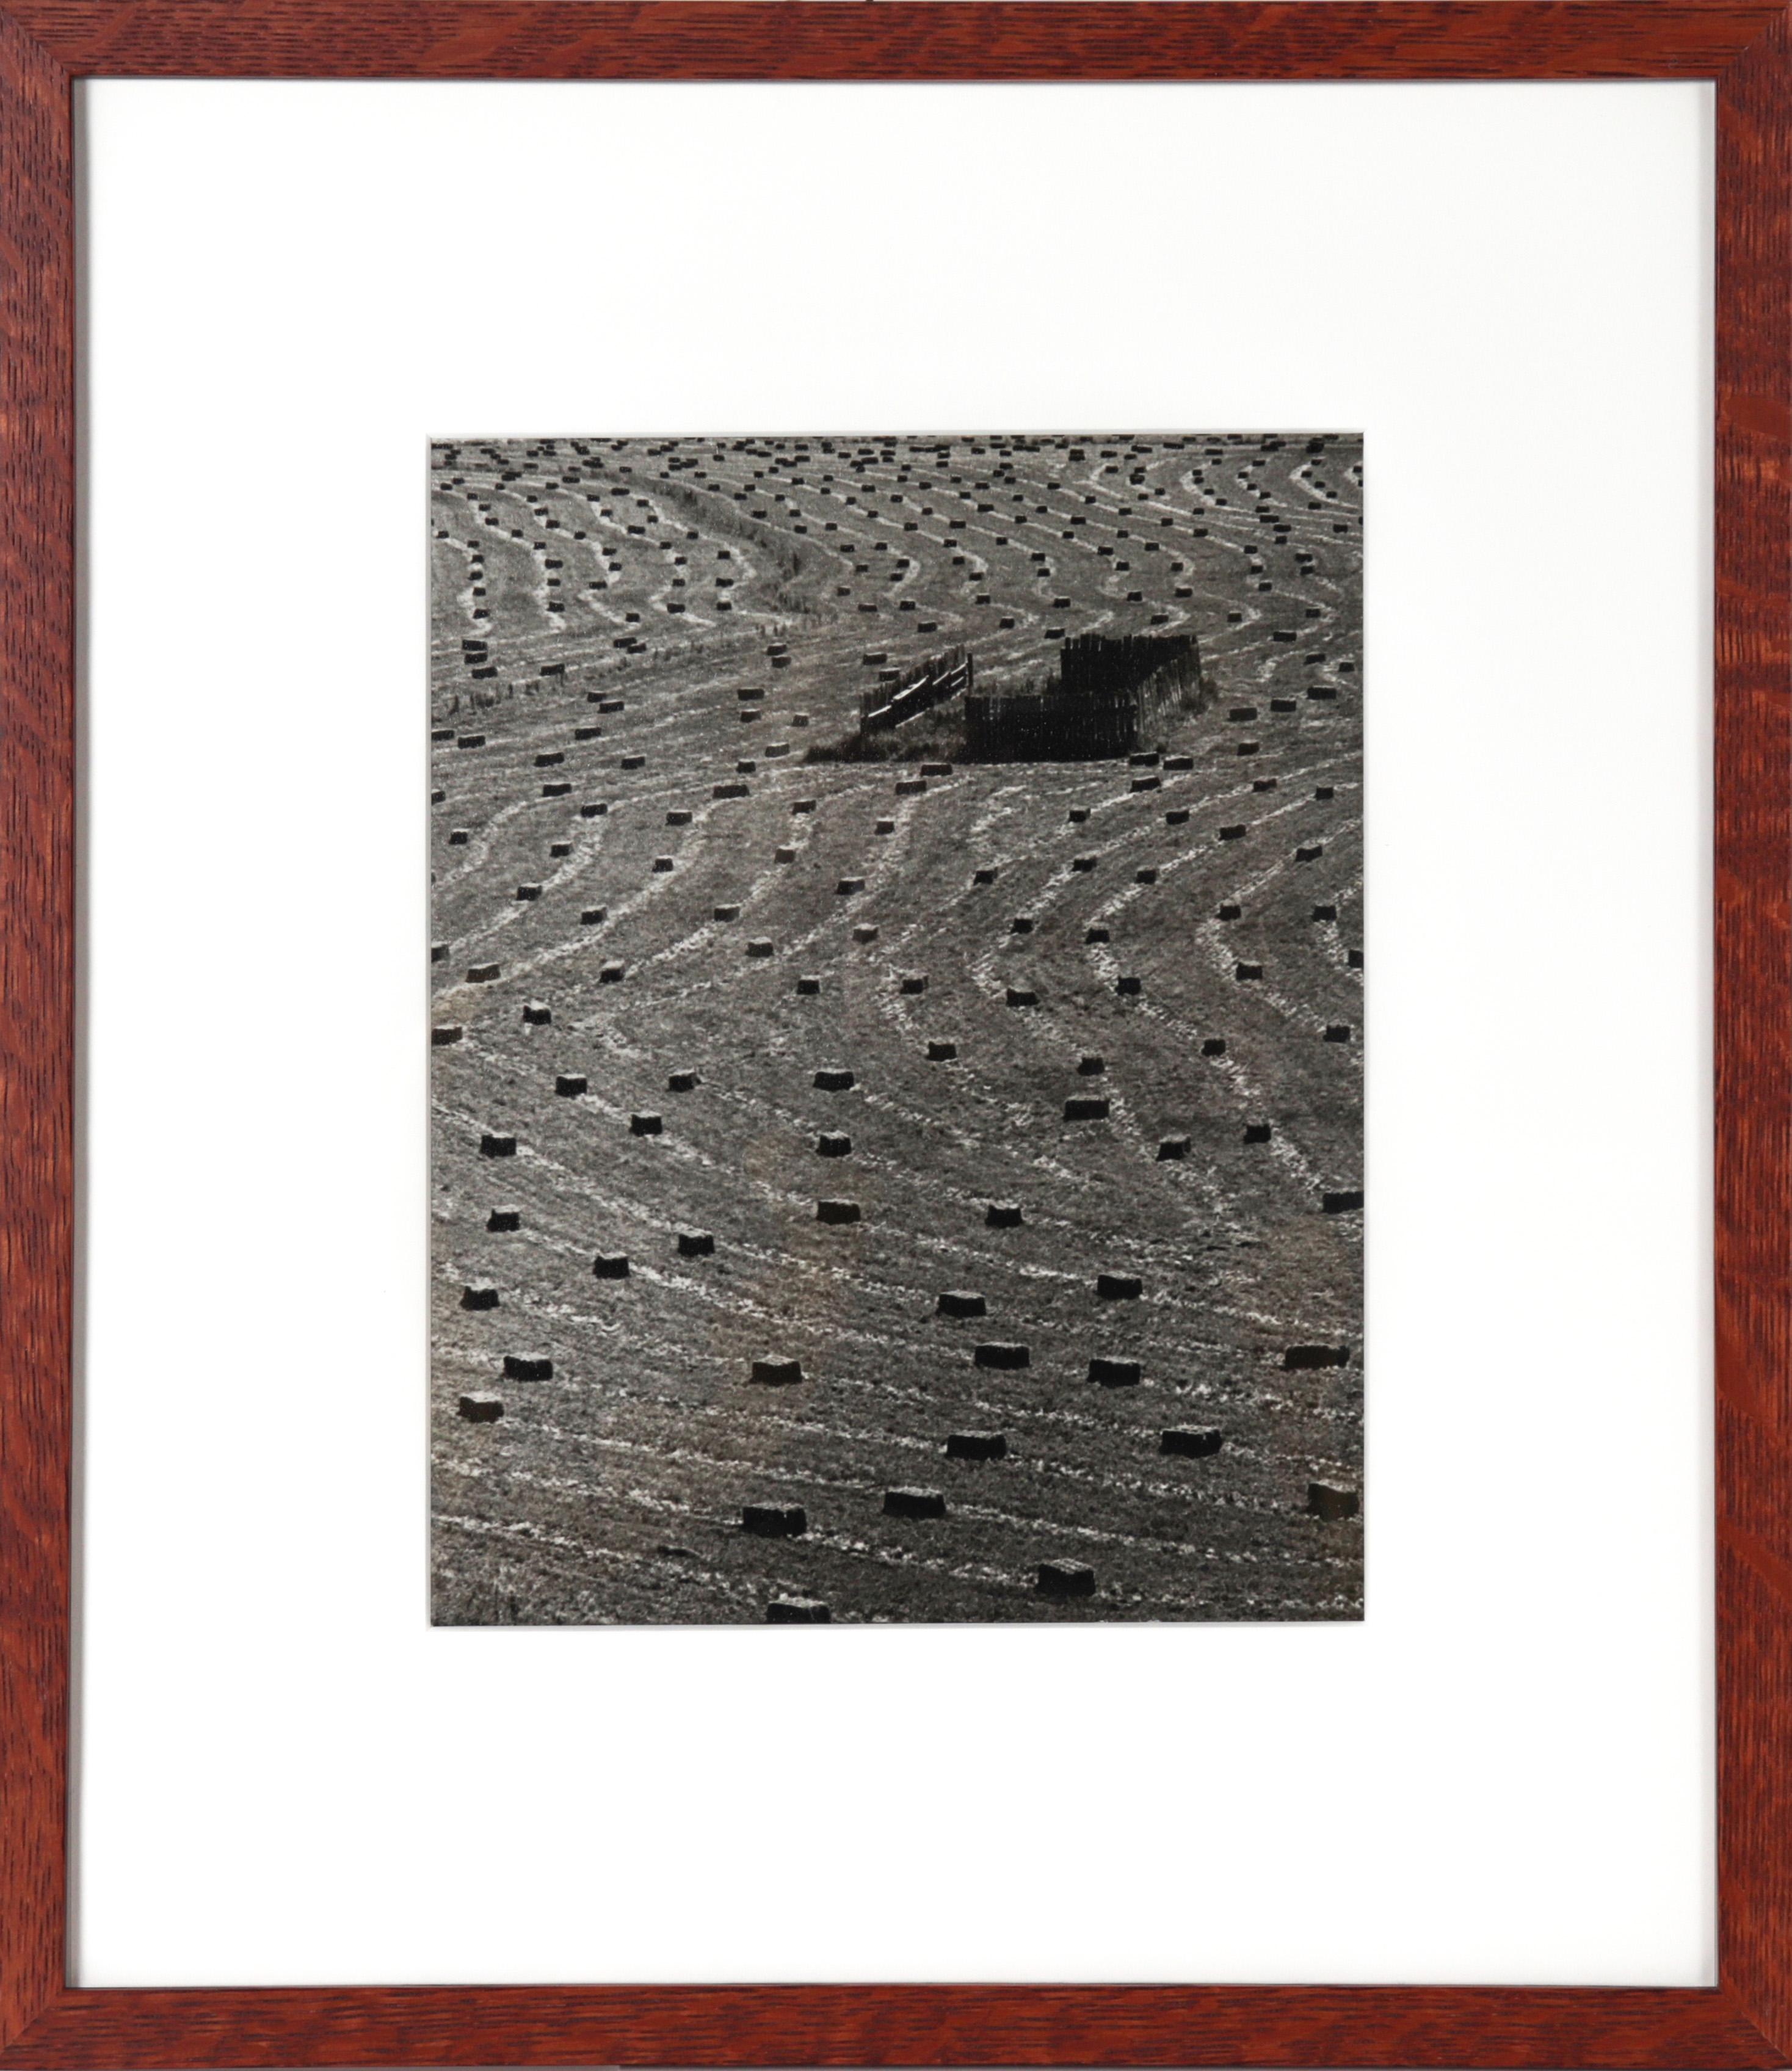 Floyd H. Sherry Landscape Photograph - Abstract Landscape View 1971 Photograph